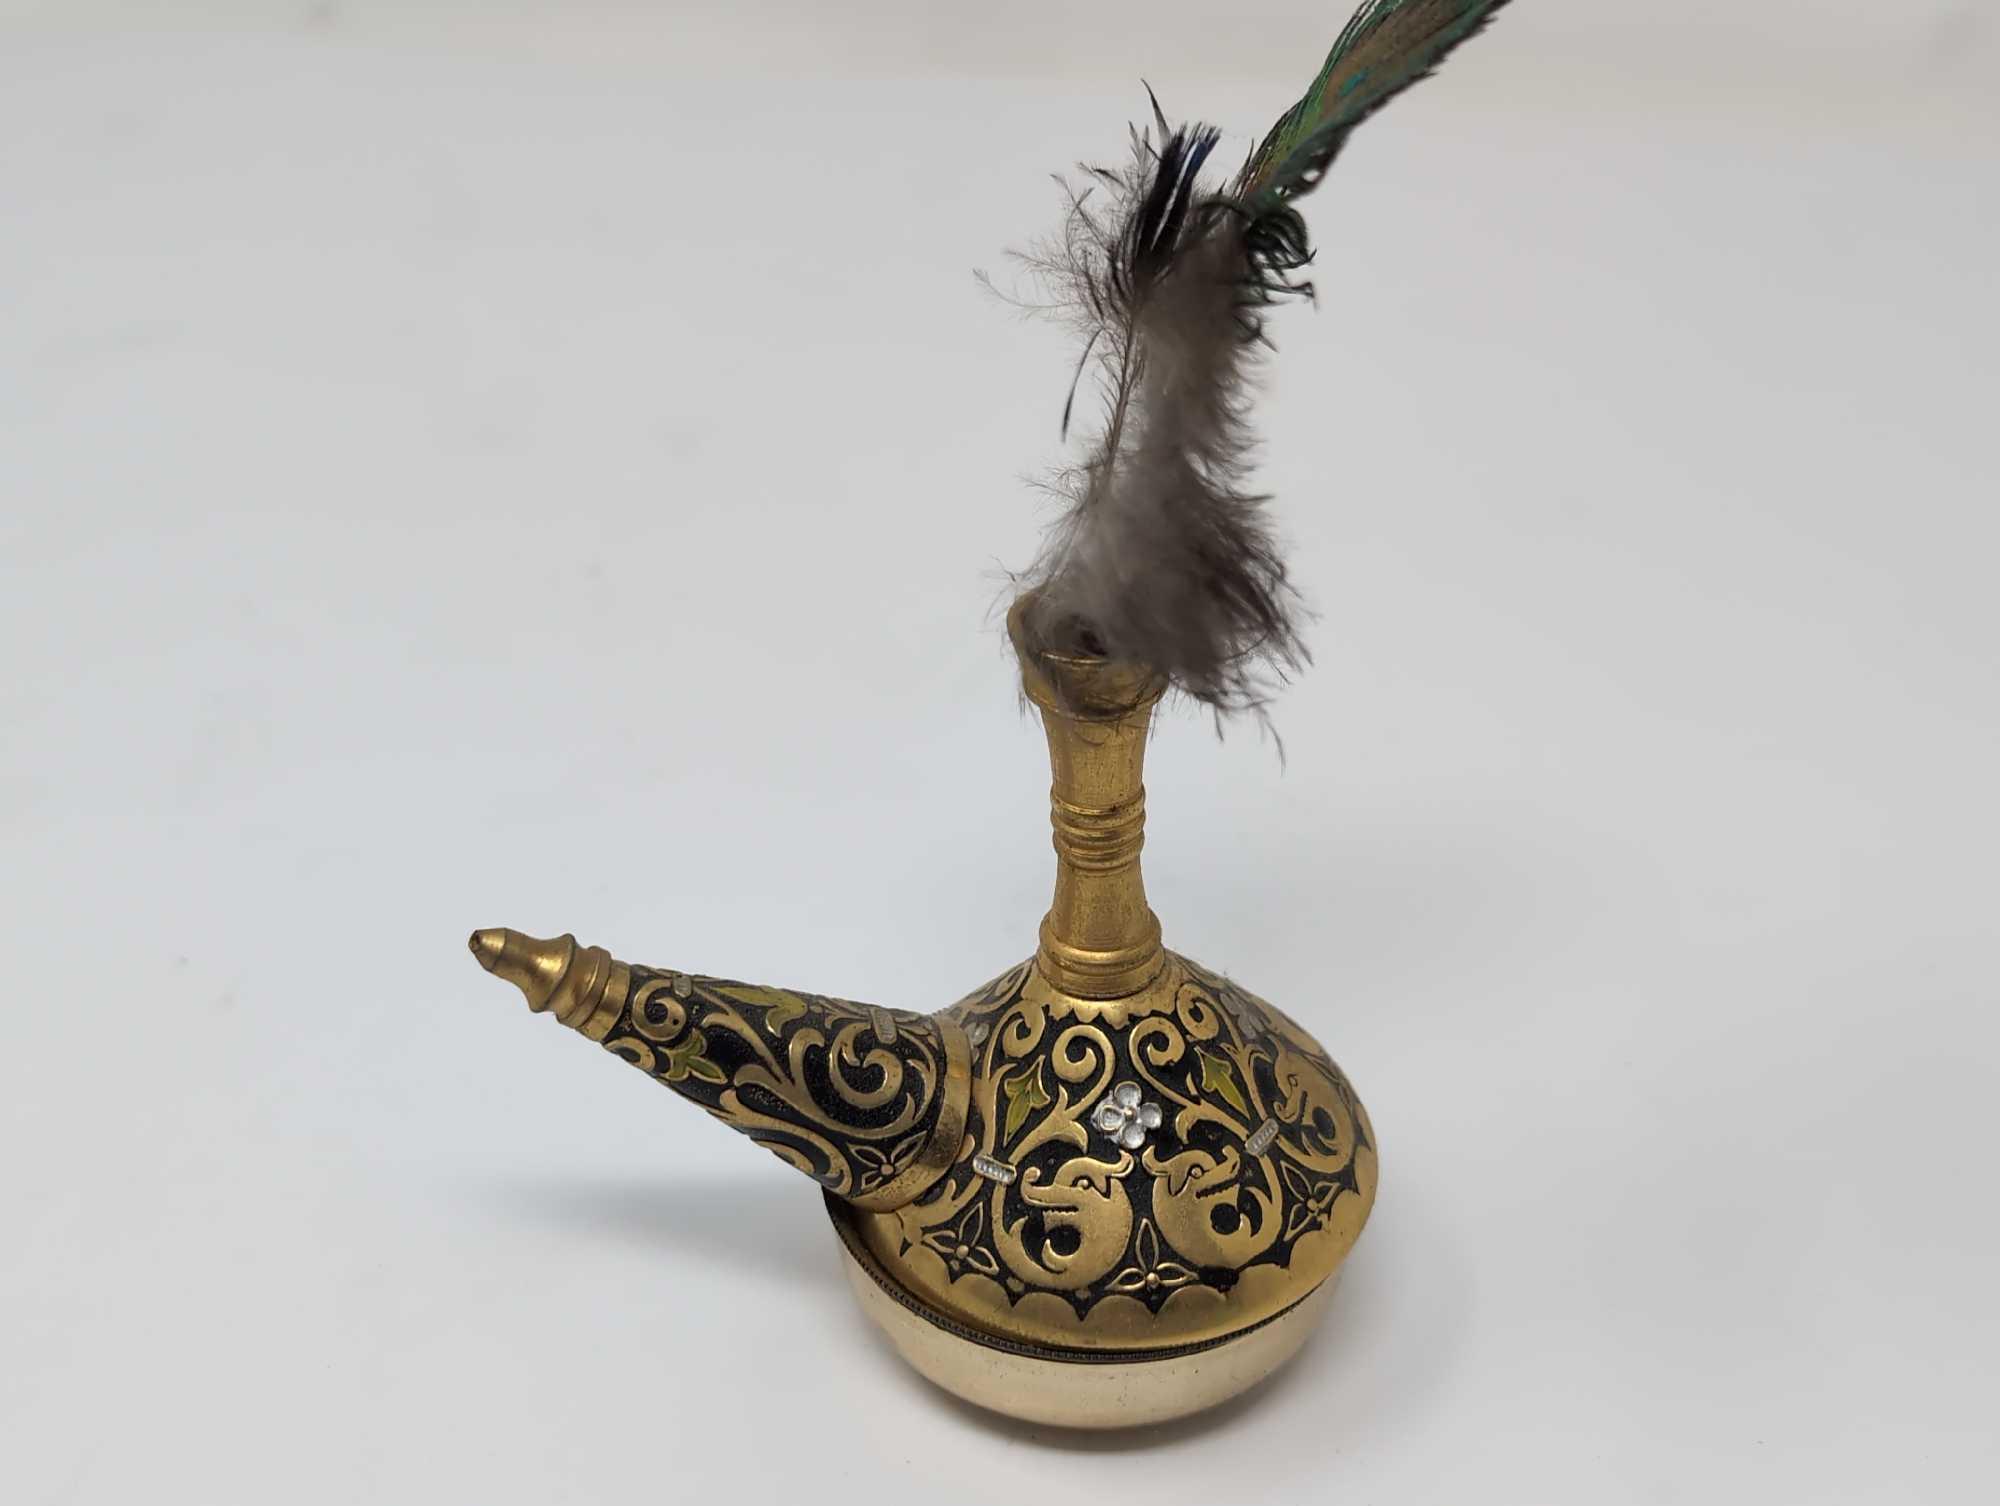 (FOYER) 2 PC. MINIATURE LOT TO INCLUDE A GOLD TONED INCENSE BURNER DETAILED WITH GOLD DRAGON AND